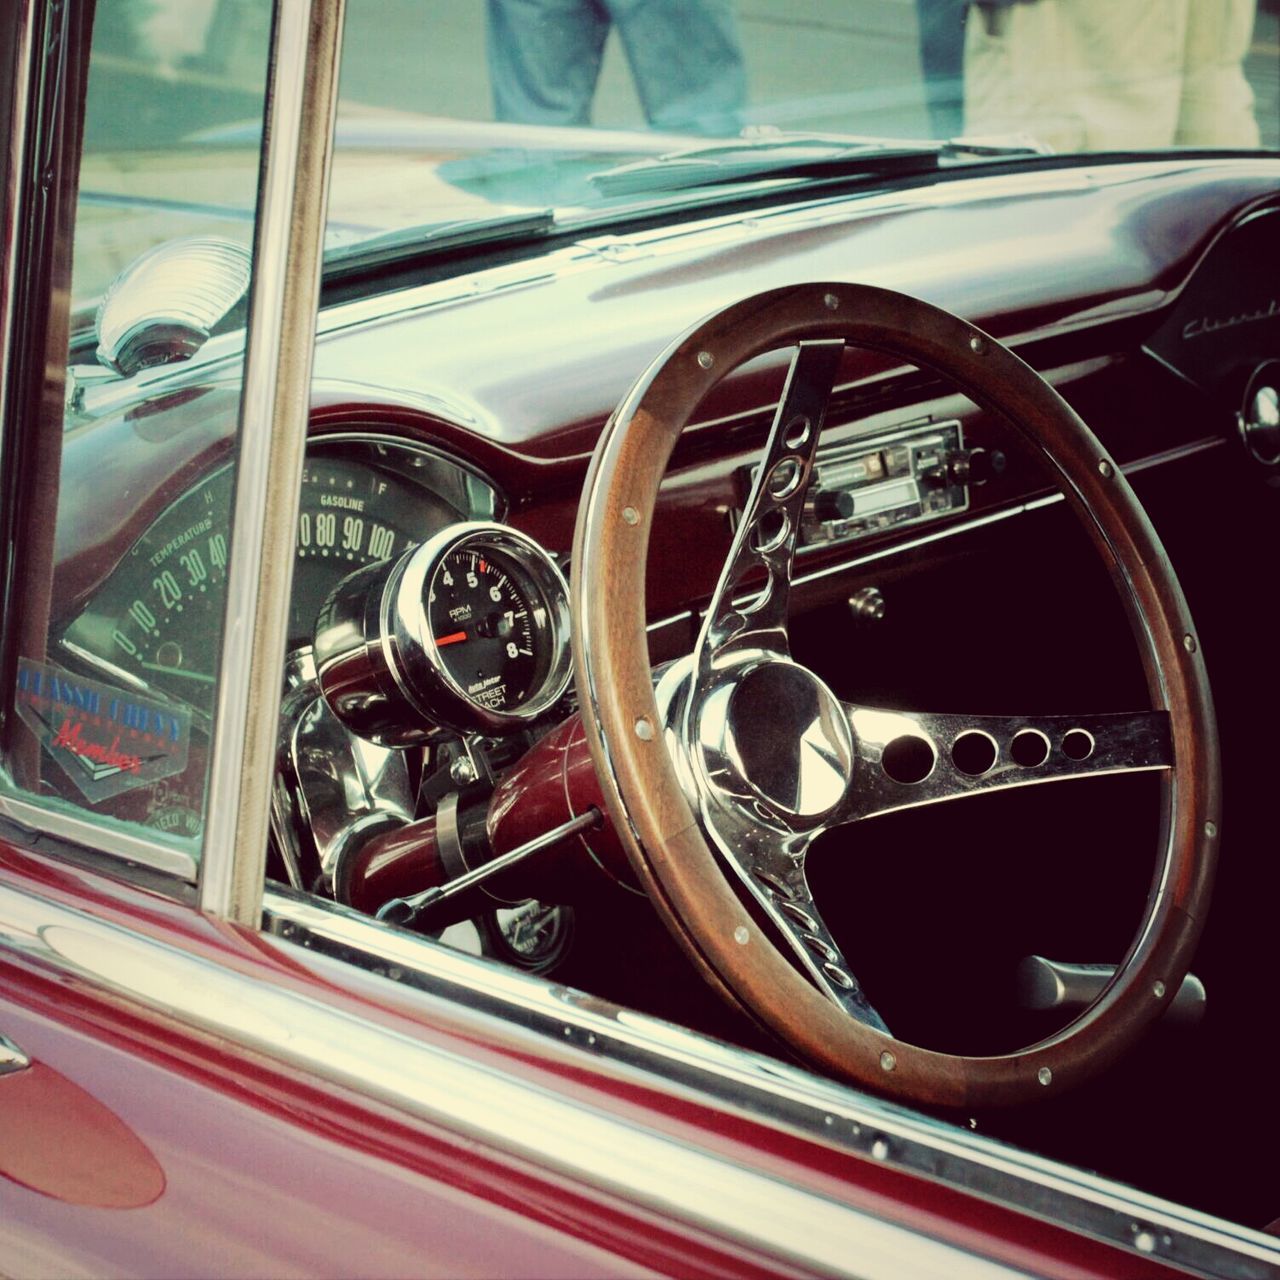 transportation, land vehicle, mode of transport, car, close-up, part of, wheel, vehicle part, headlight, vintage car, stationary, old-fashioned, metal, steering wheel, vehicle interior, tire, travel, cropped, retro styled, car interior